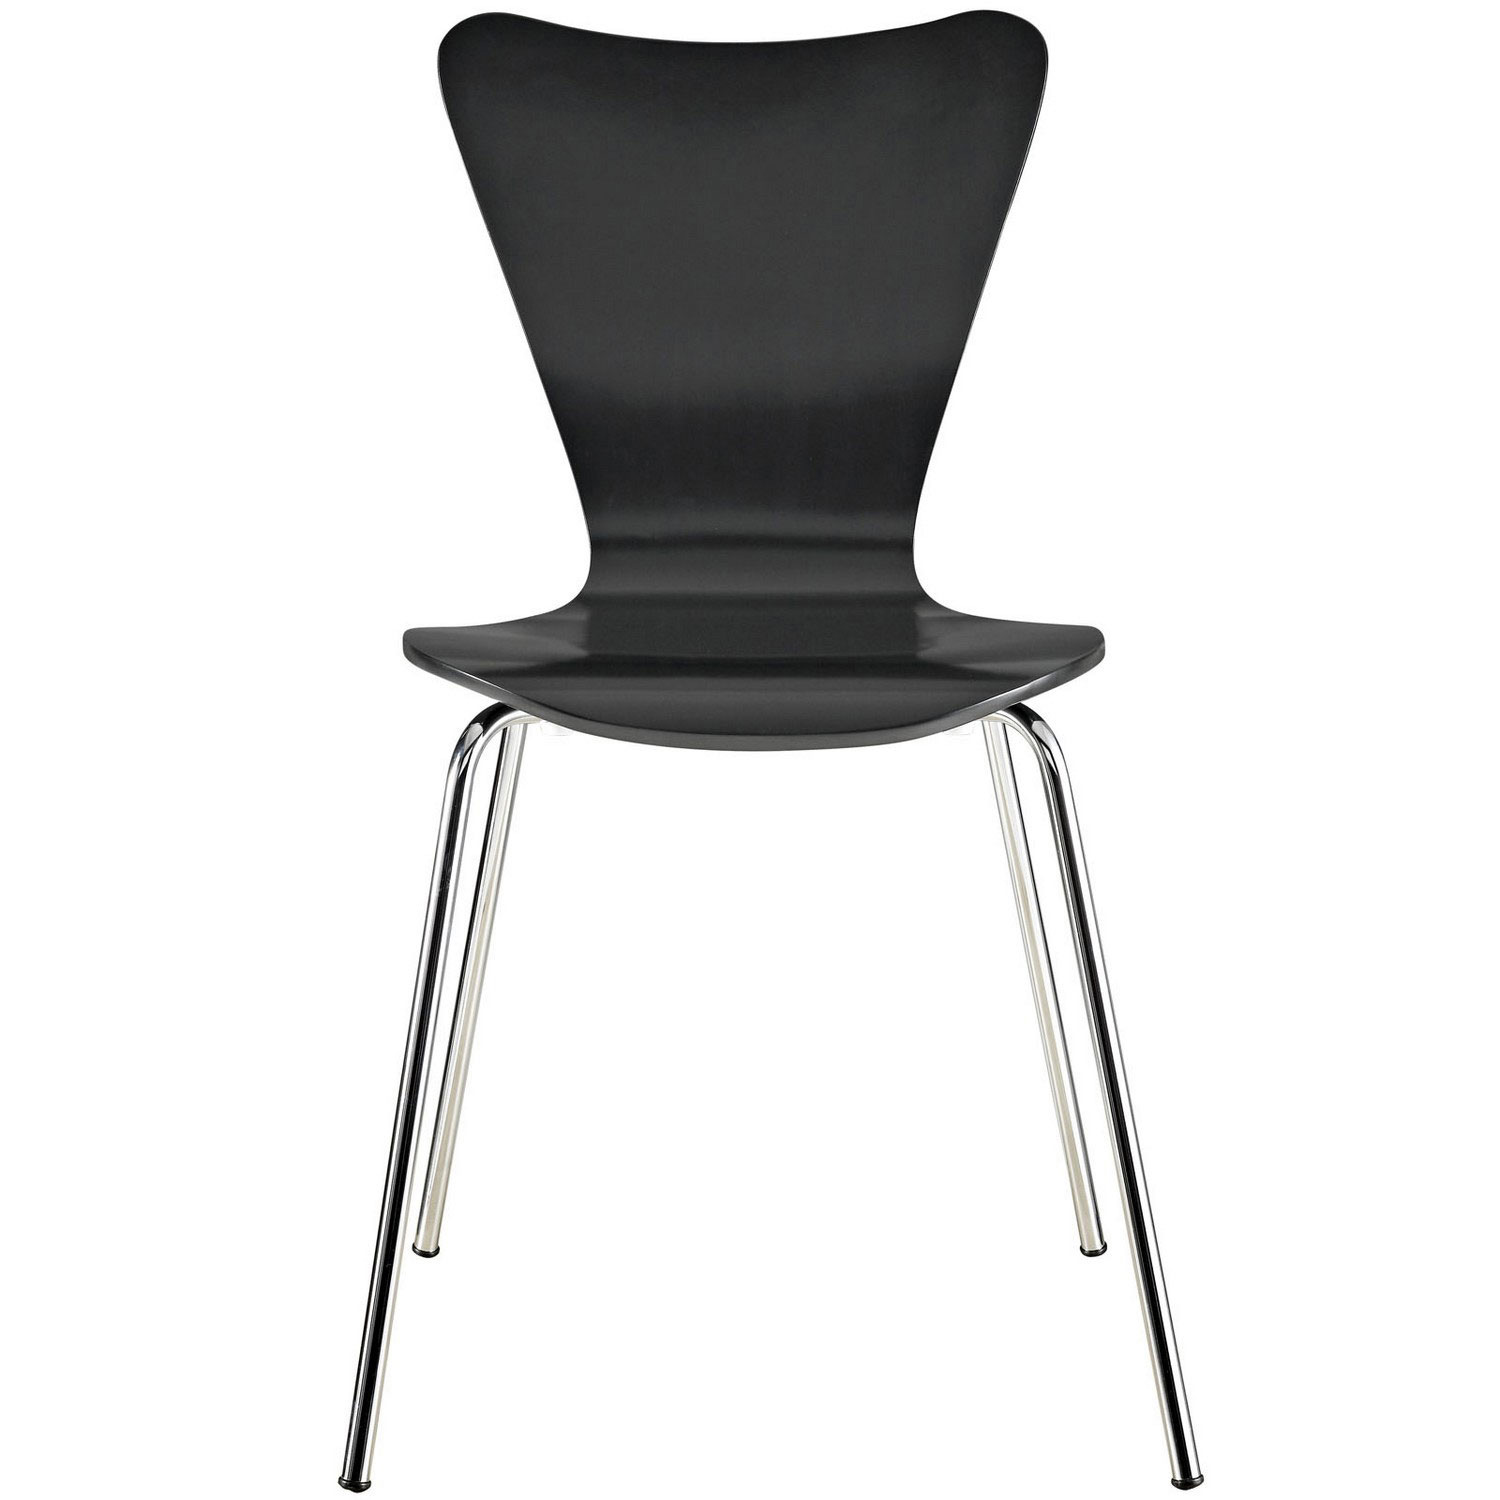 Modway Ernie Dining Side Chair - Black